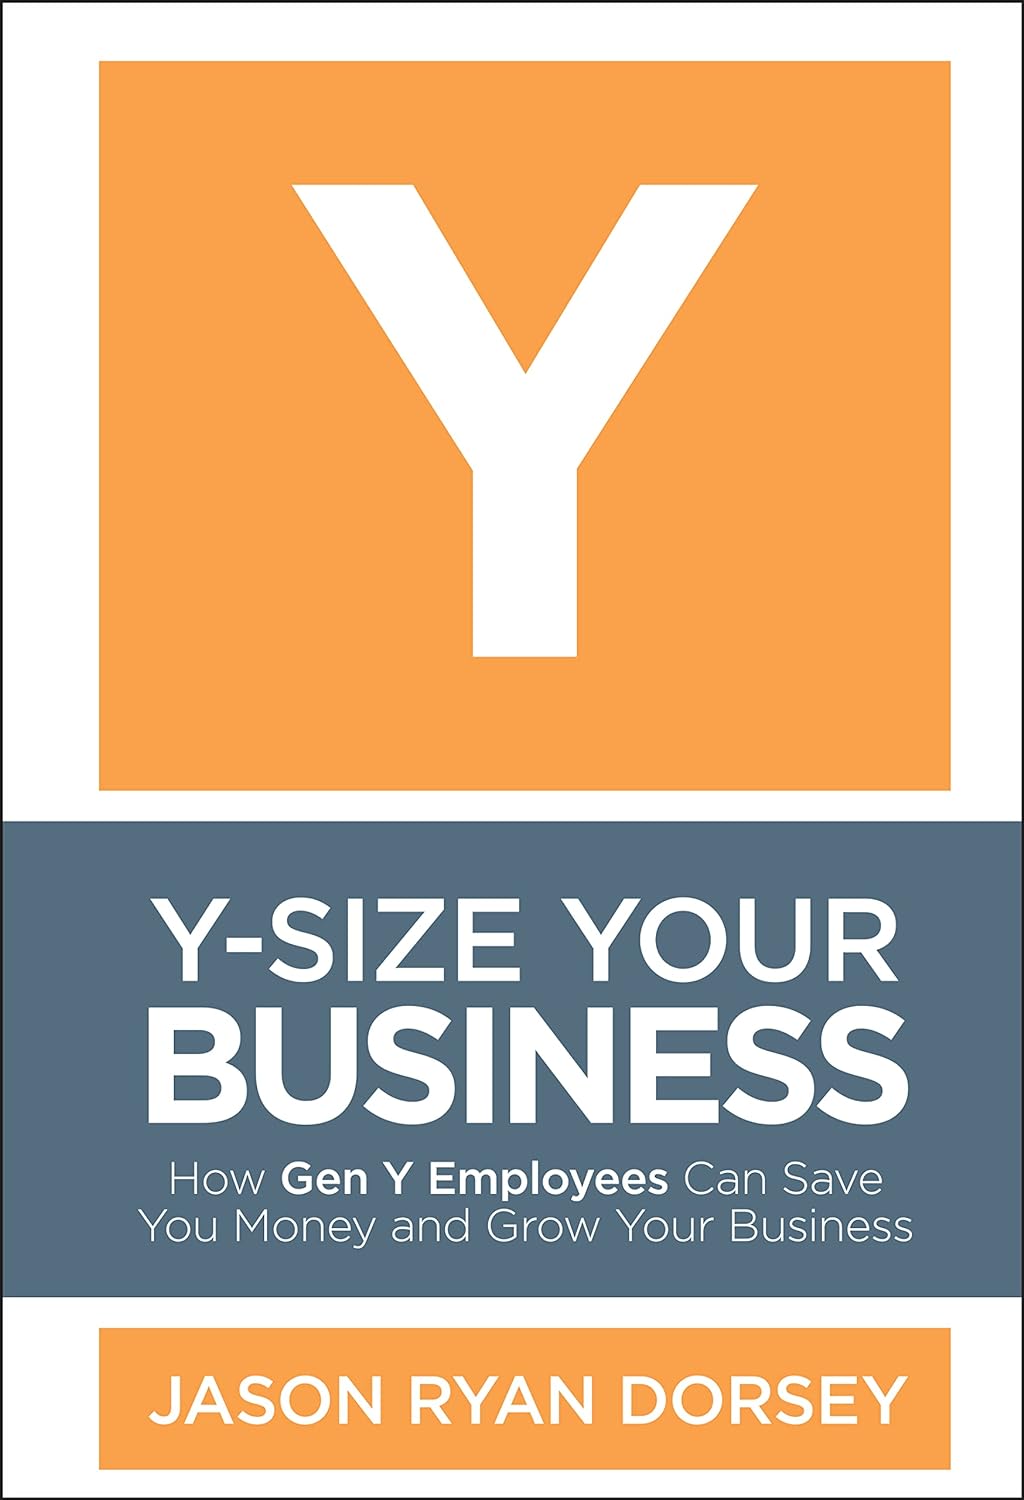 Jayson Ryan Dorsey - Y-Size Your Business. How Gen Y Employees Can Save You Money and Grow Your Business